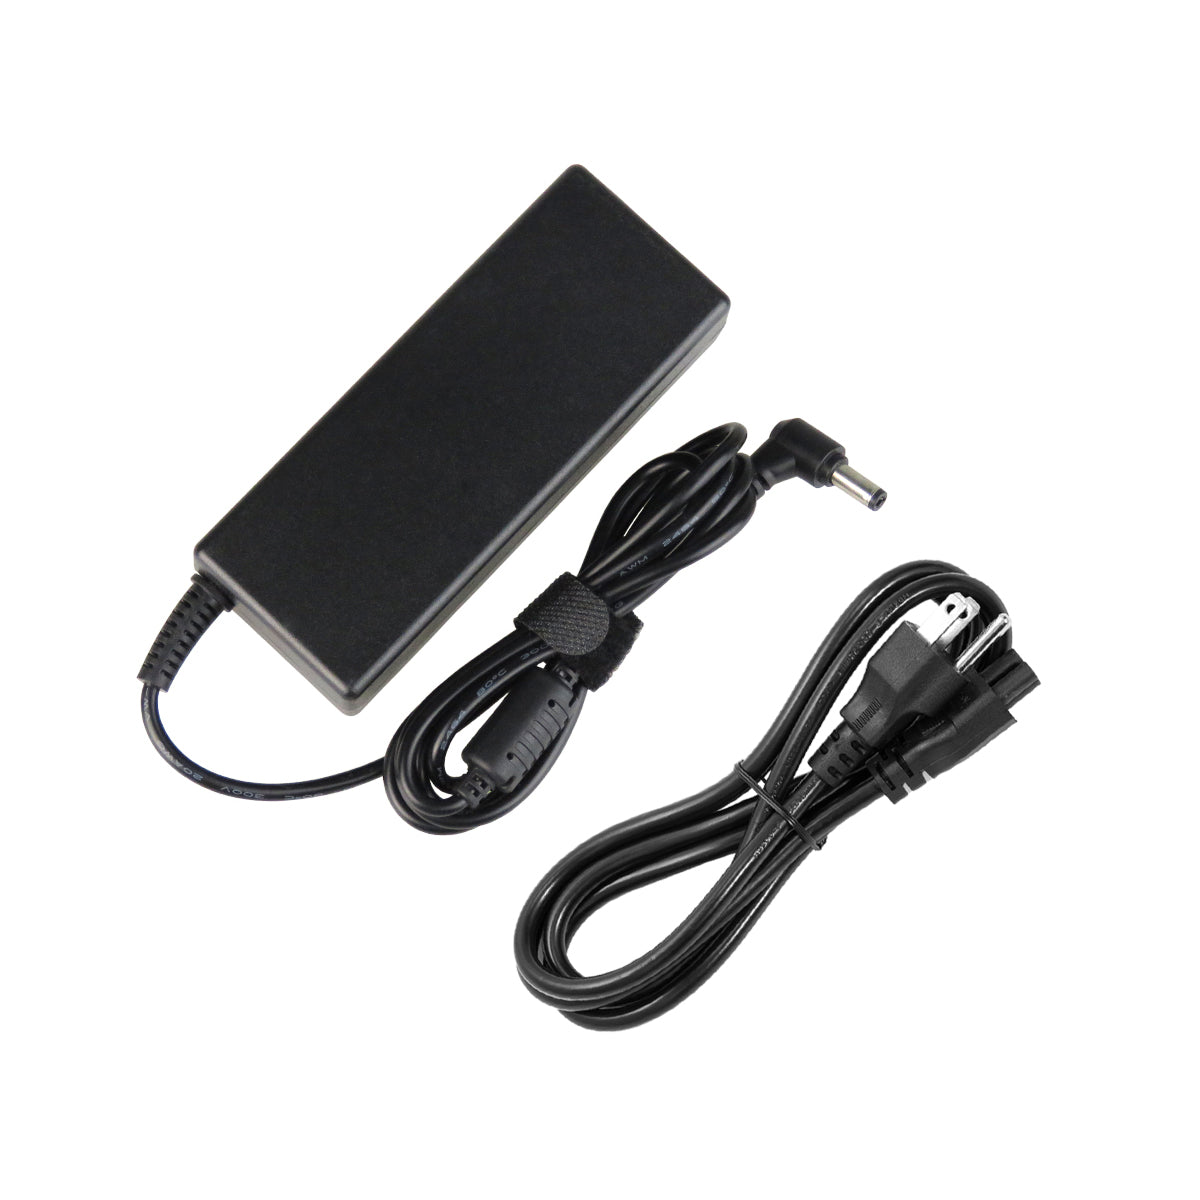 AC Adapter Charger for ASUS A54H Notebook.